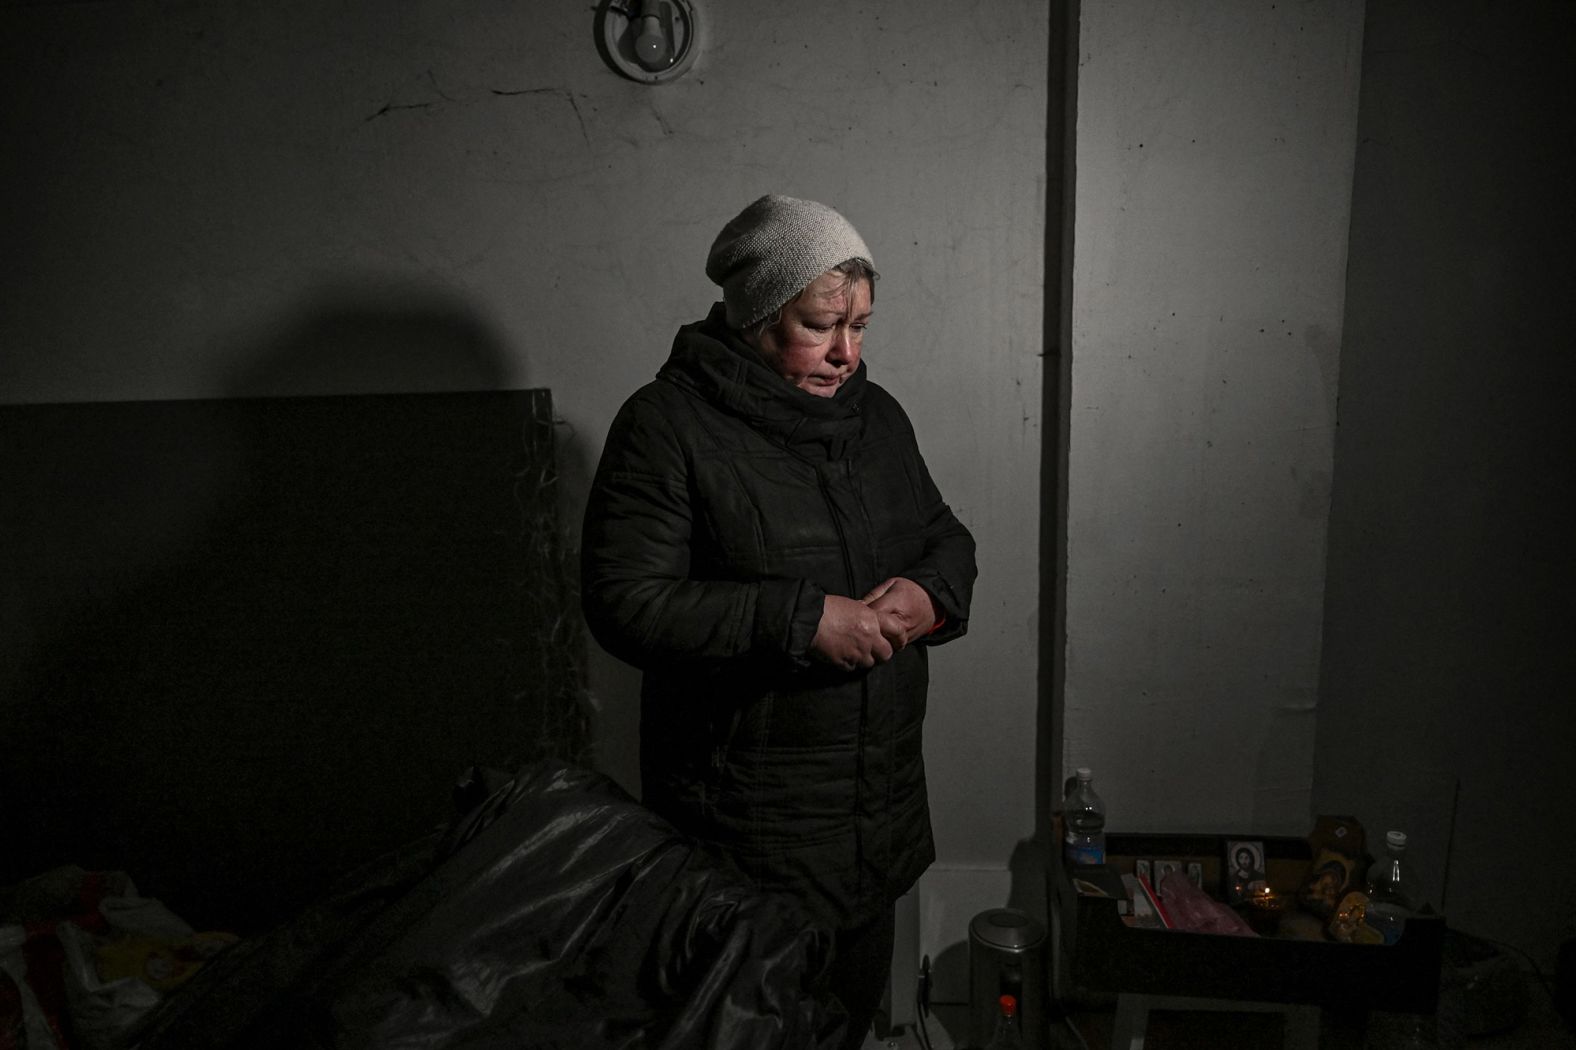 A resident takes shelter in a basement in Irpin on March 10. <a href="index.php?page=&url=https%3A%2F%2Fwww.cnn.com%2Feurope%2Flive-news%2Fukraine-russia-putin-news-03-08-22%2Fh_e09d49888fcb2a07b8f1a95d6f2b0faa" target="_blank">Due to heavy fighting,</a> Irpin has been without heat, water or electricity for several days.